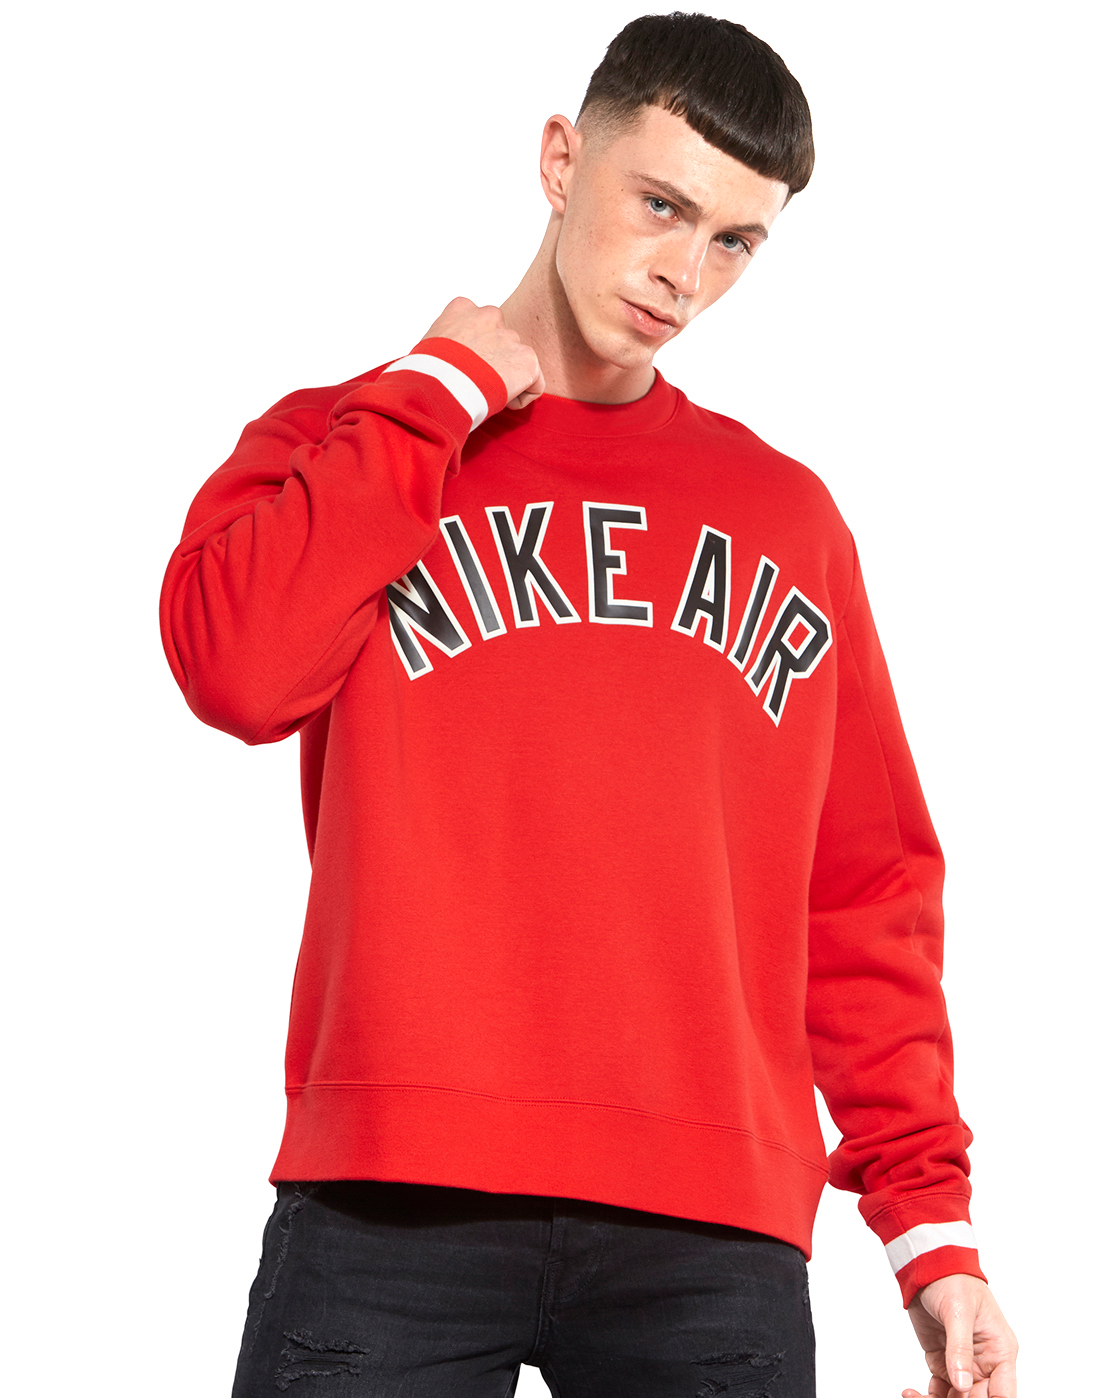 nike air crew sweater Shop Clothing \u0026 Shoes Online